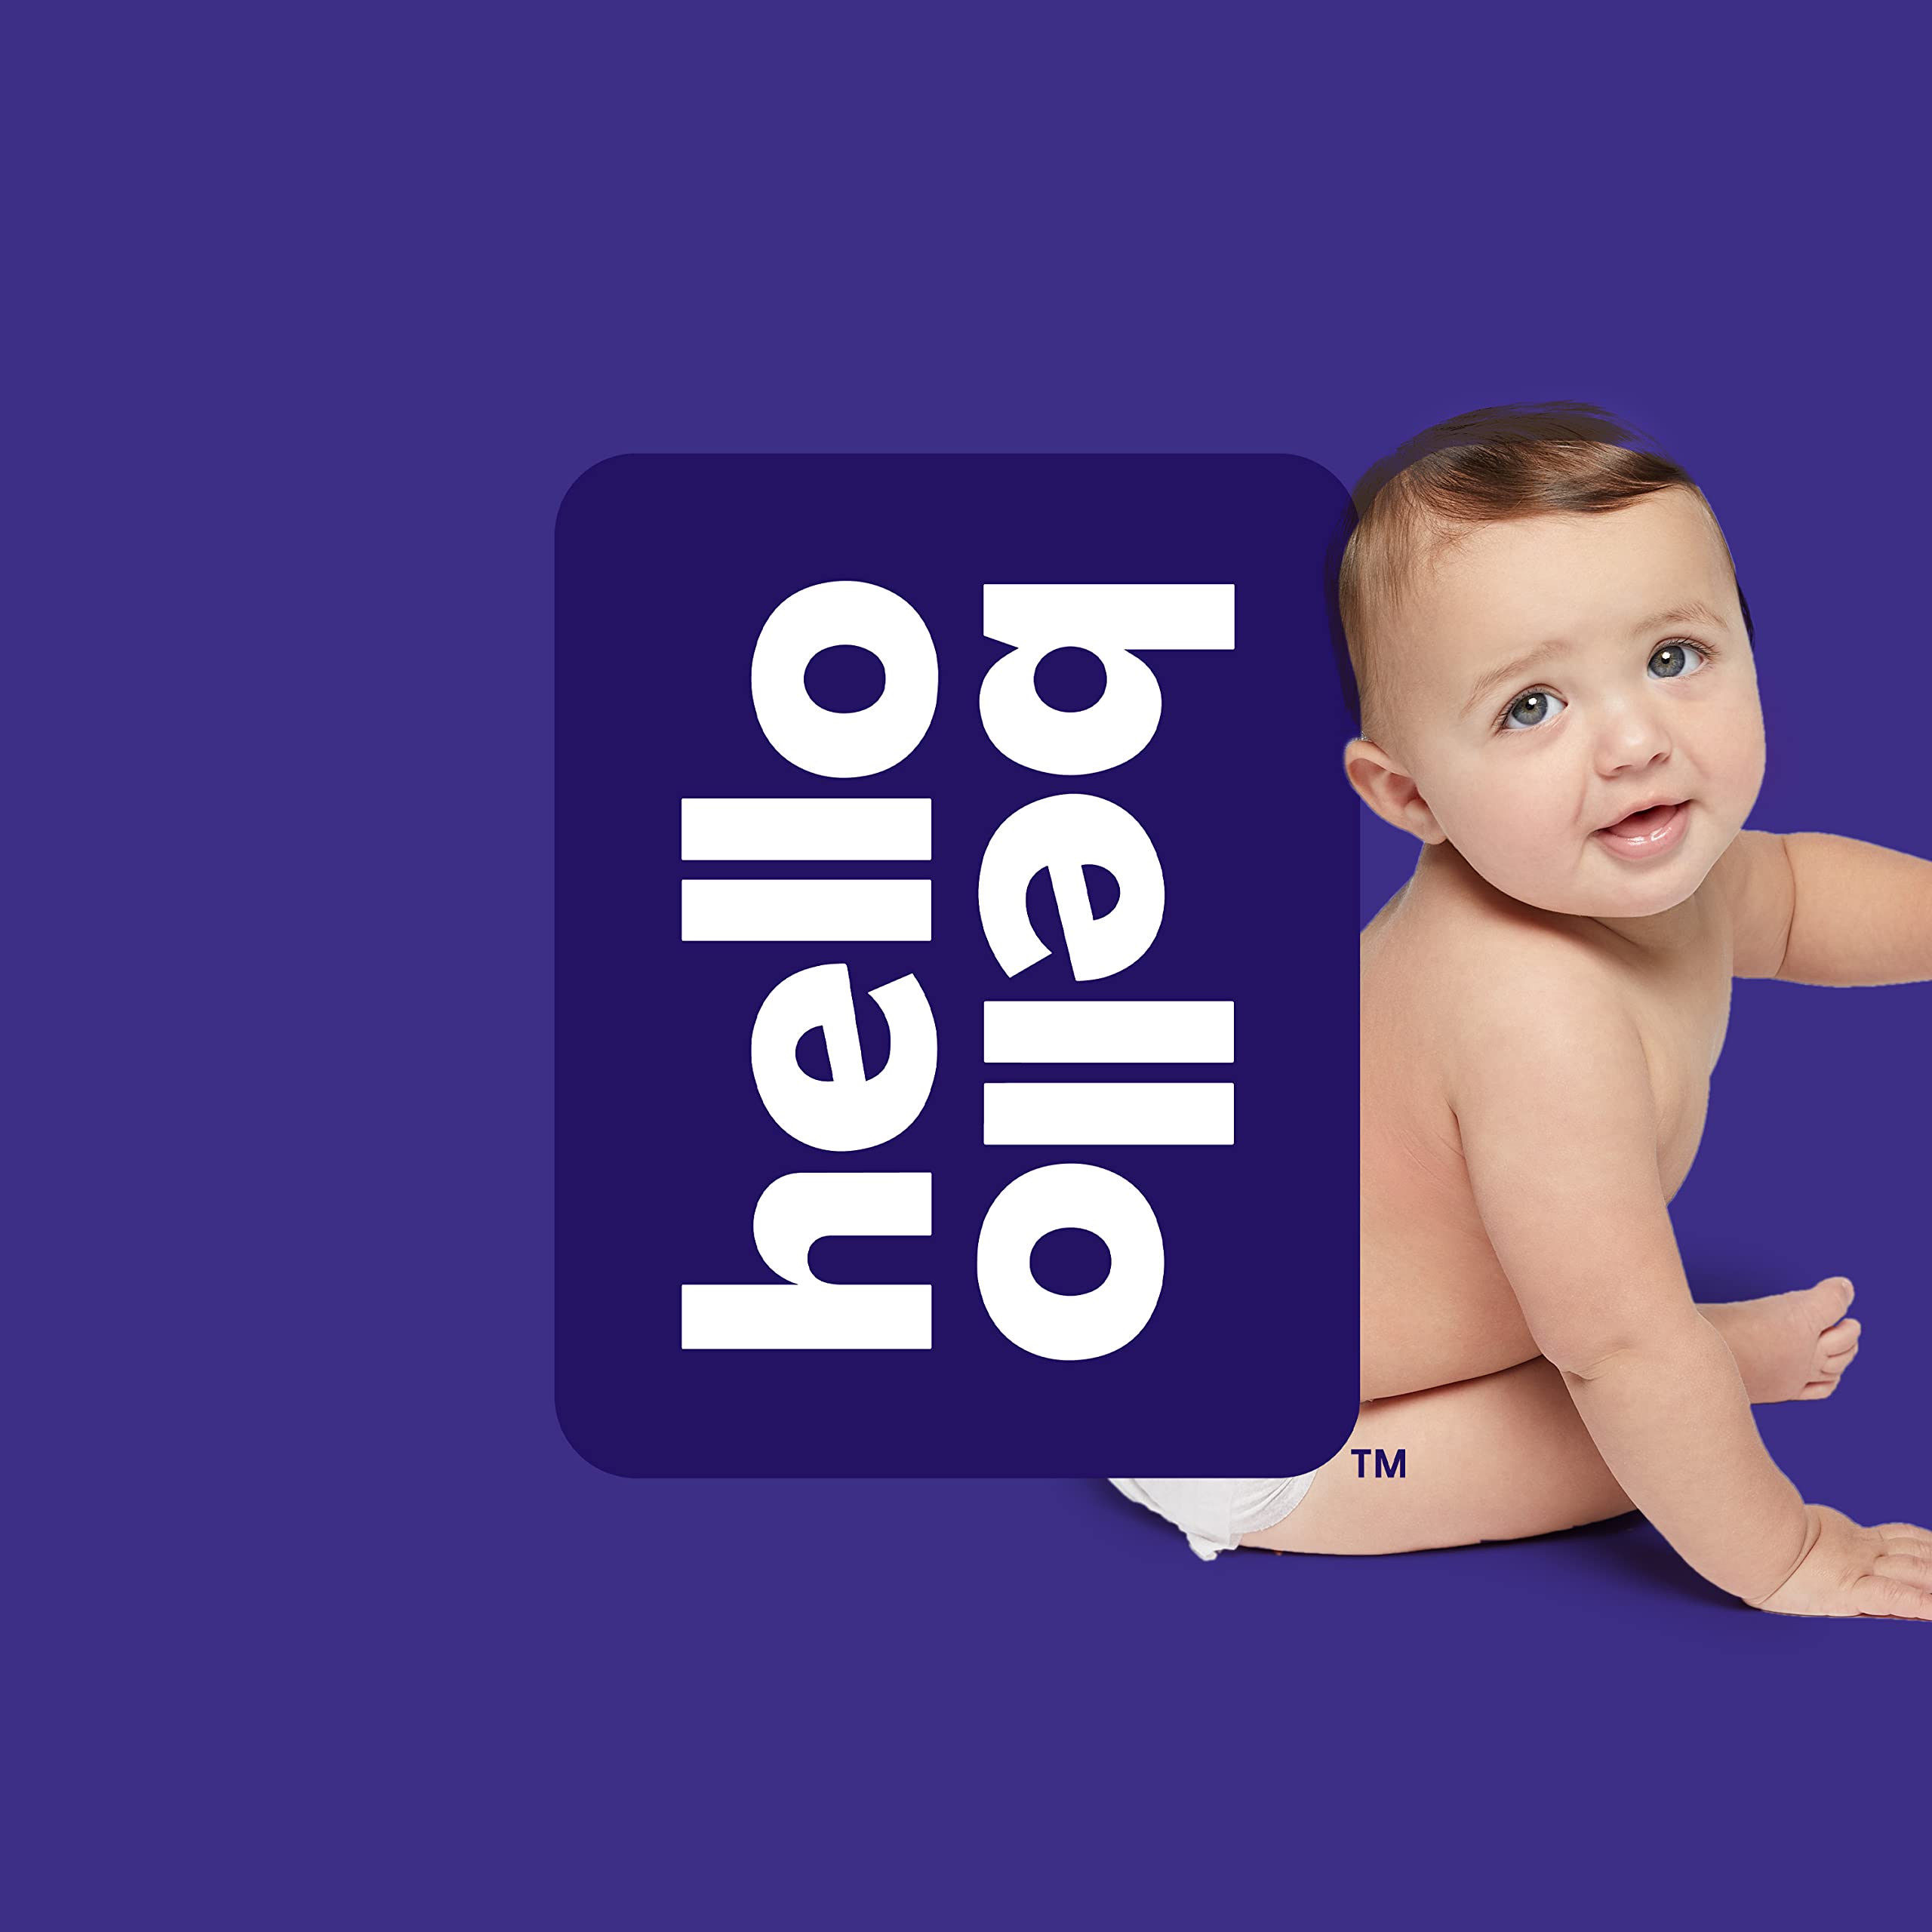 Hello Bello Premium Overnight Baby Diapers Size 5 I 18 Count of Ultra Absorbent and Super Soft, and Eco-Friendly Nighttime Disposable Diapers for Babies and Toddlers I Sleepy Sloths